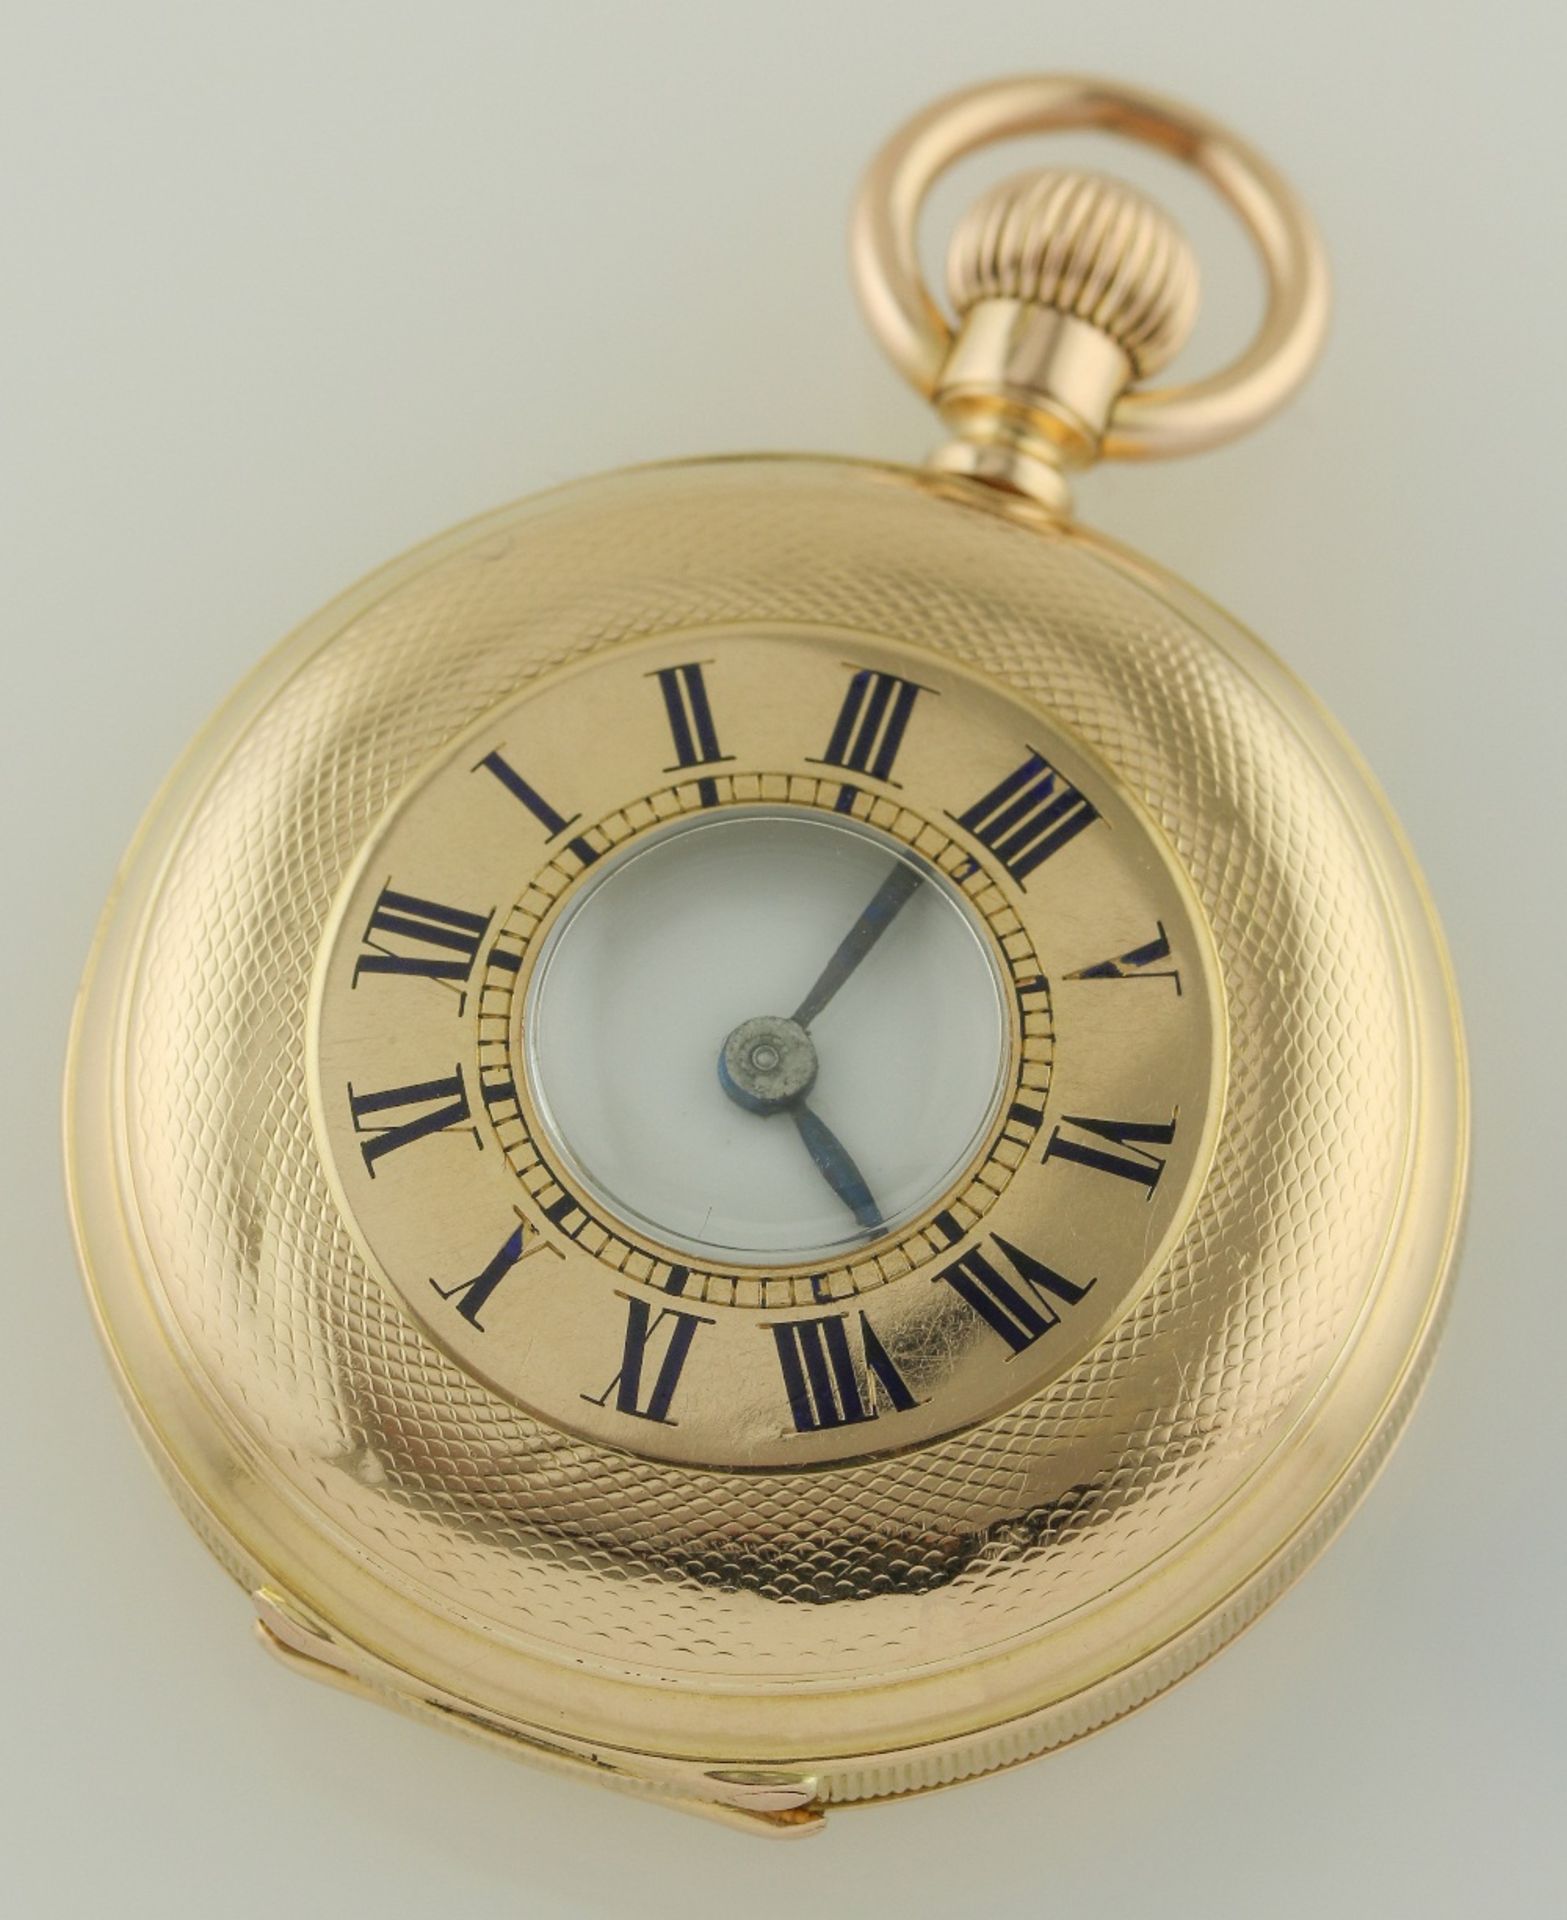 A LADIES 18K SOLID GOLD PATEK PHILIPPE HALF HUNTER POCKET WATCH CIRCA 1910, REF. 67120 MADE FOR A. - Image 2 of 9